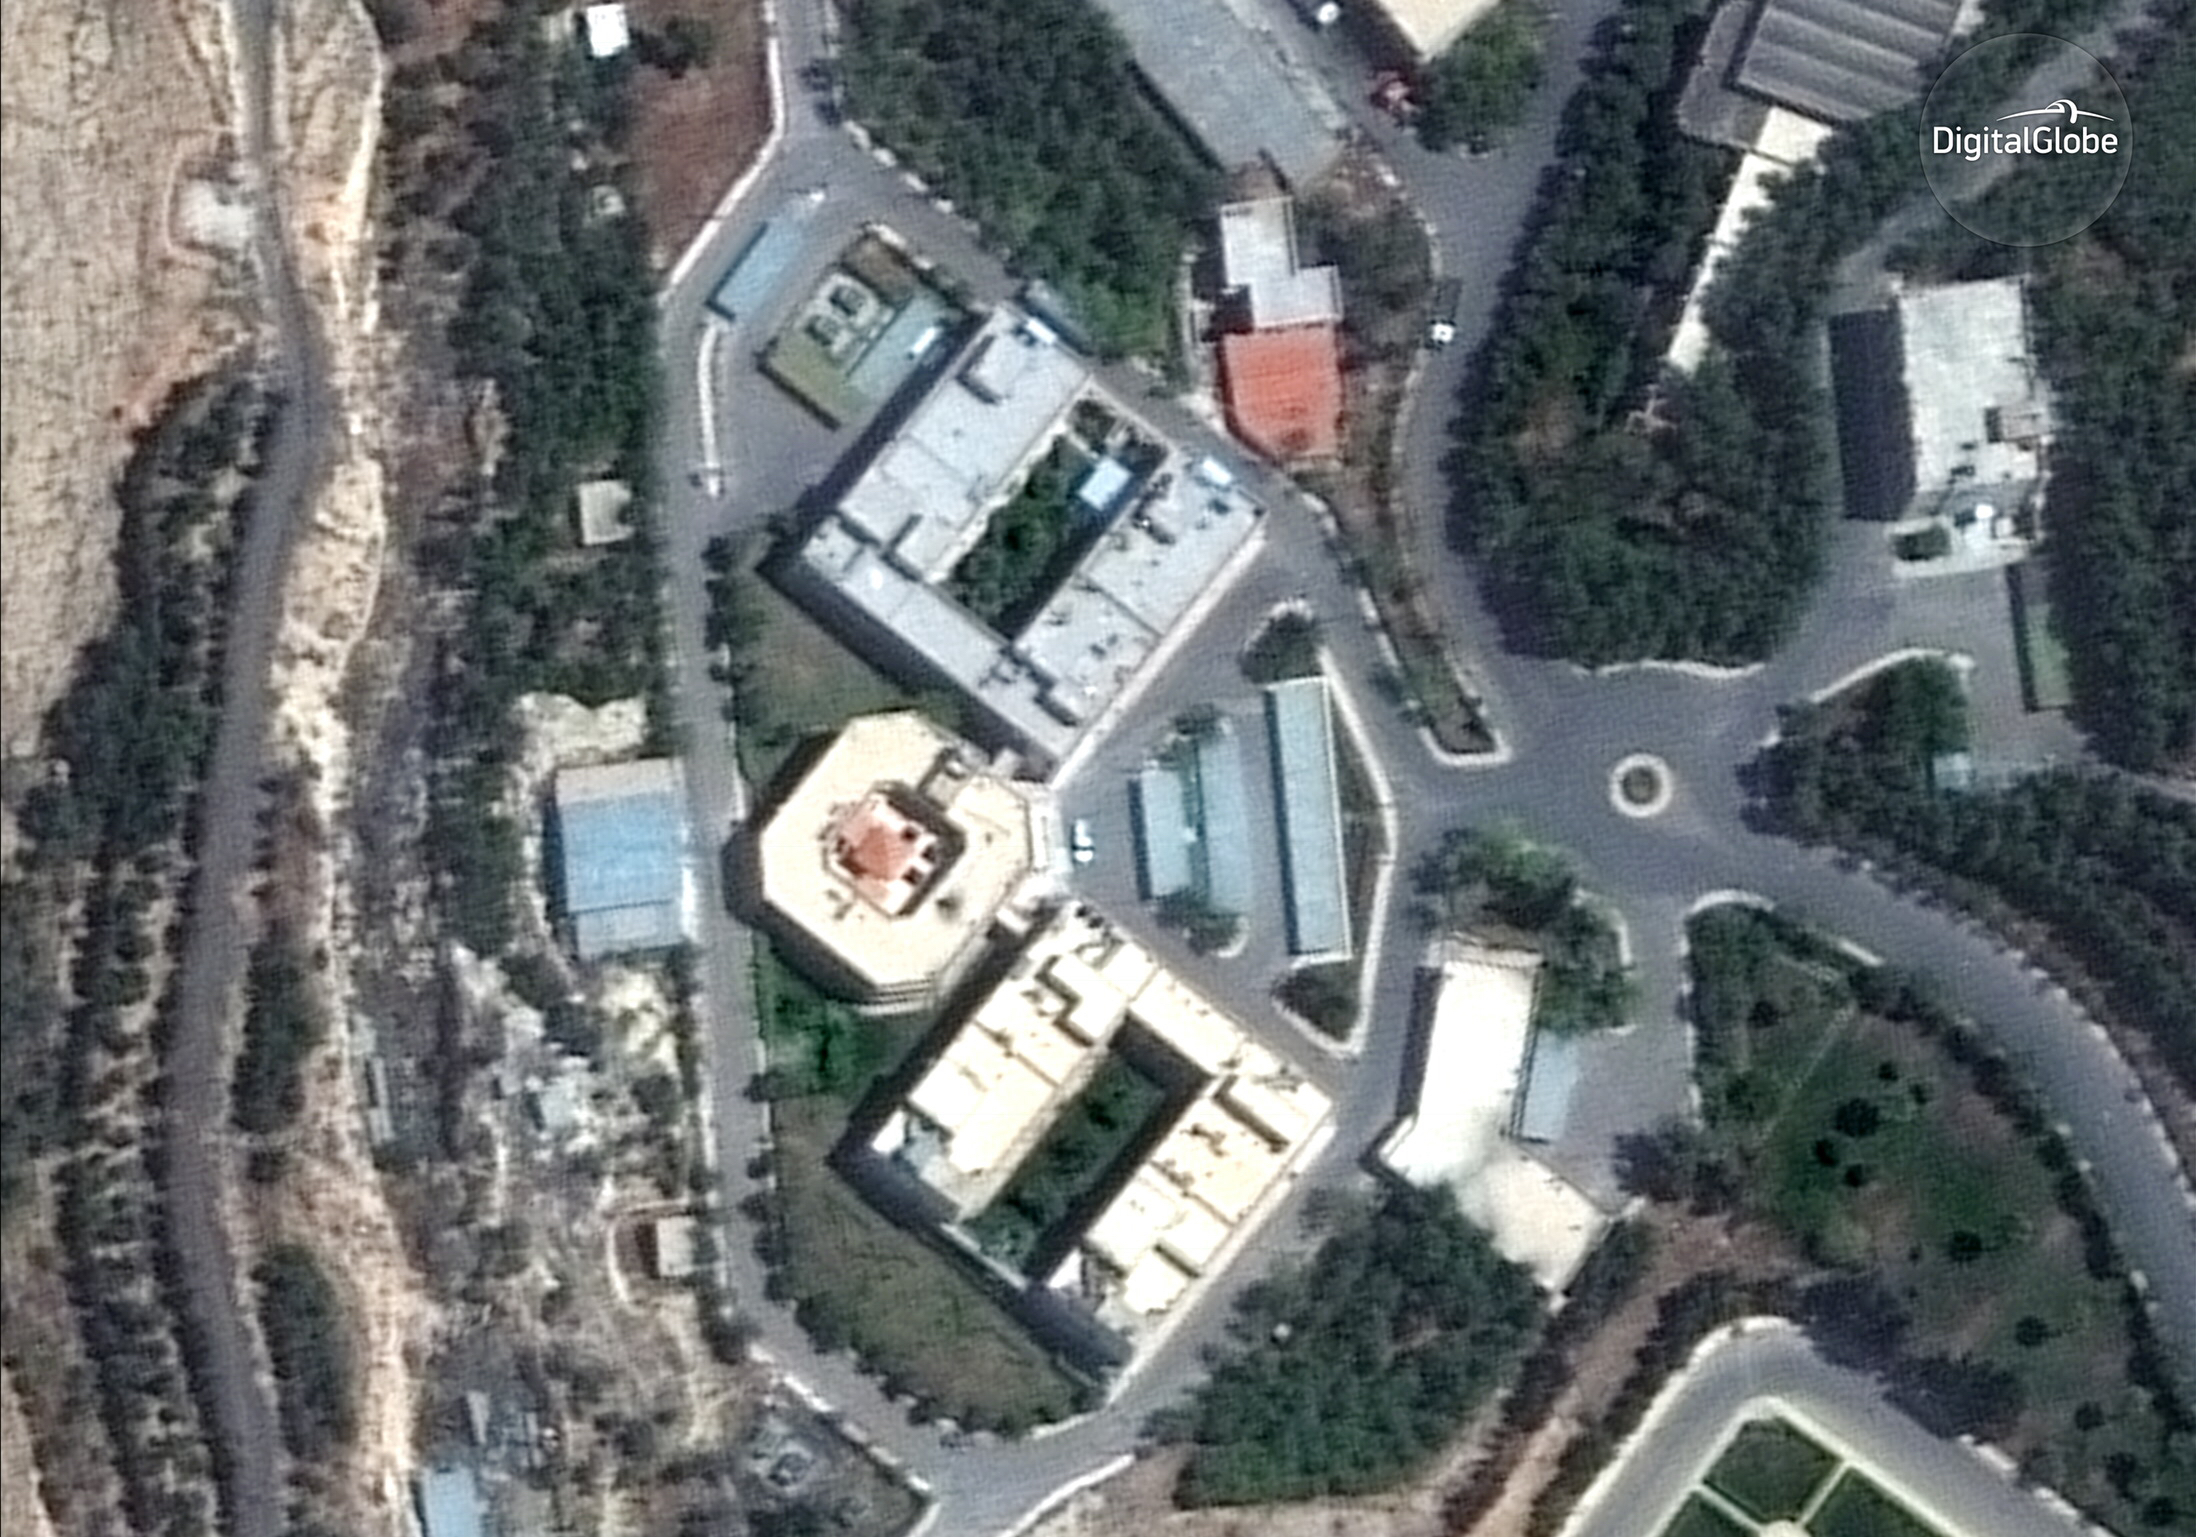 The Barzah Research and Development Center in Damascus, Syria, before it was struck by coalition forces on Saturday. (Satellite image © 2018 DigitalGlobe, a Maxar company.)